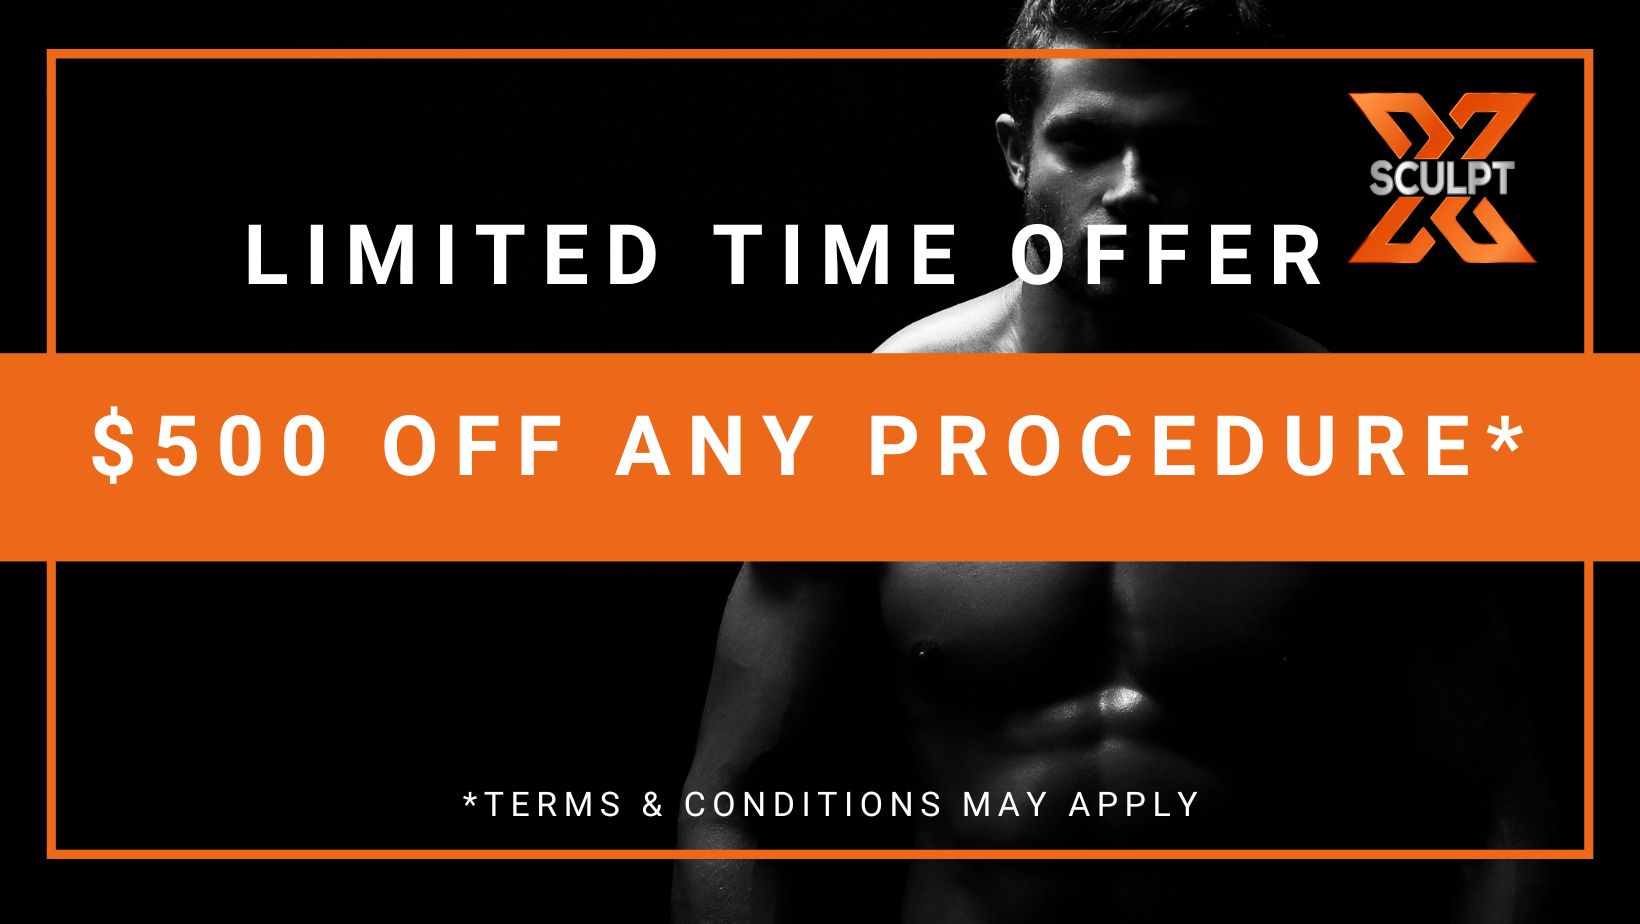 Xsculpt Limited time offer pricing: $ 500 off any procedure.